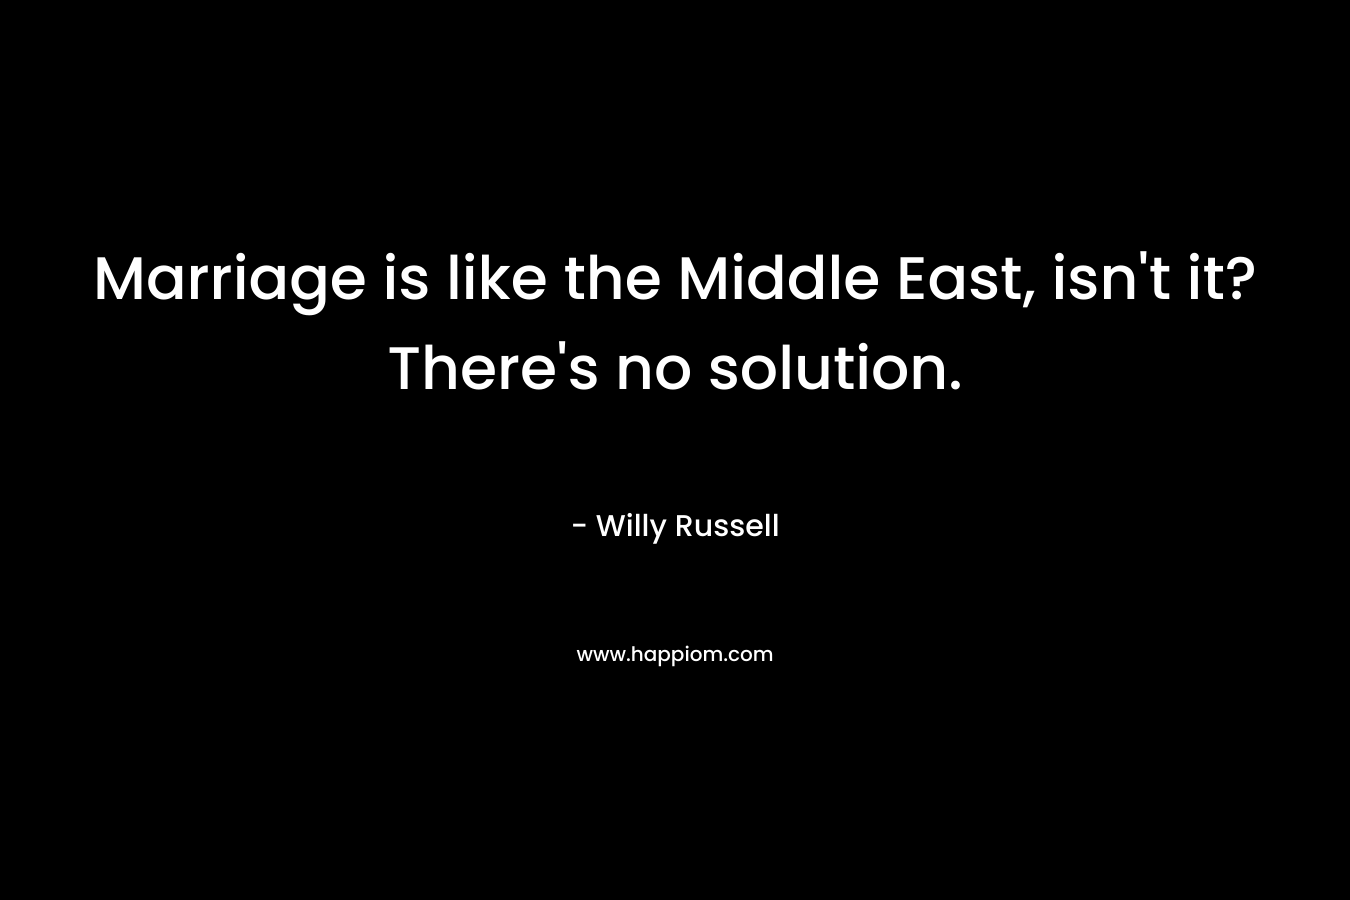 Marriage is like the Middle East, isn't it? There's no solution.